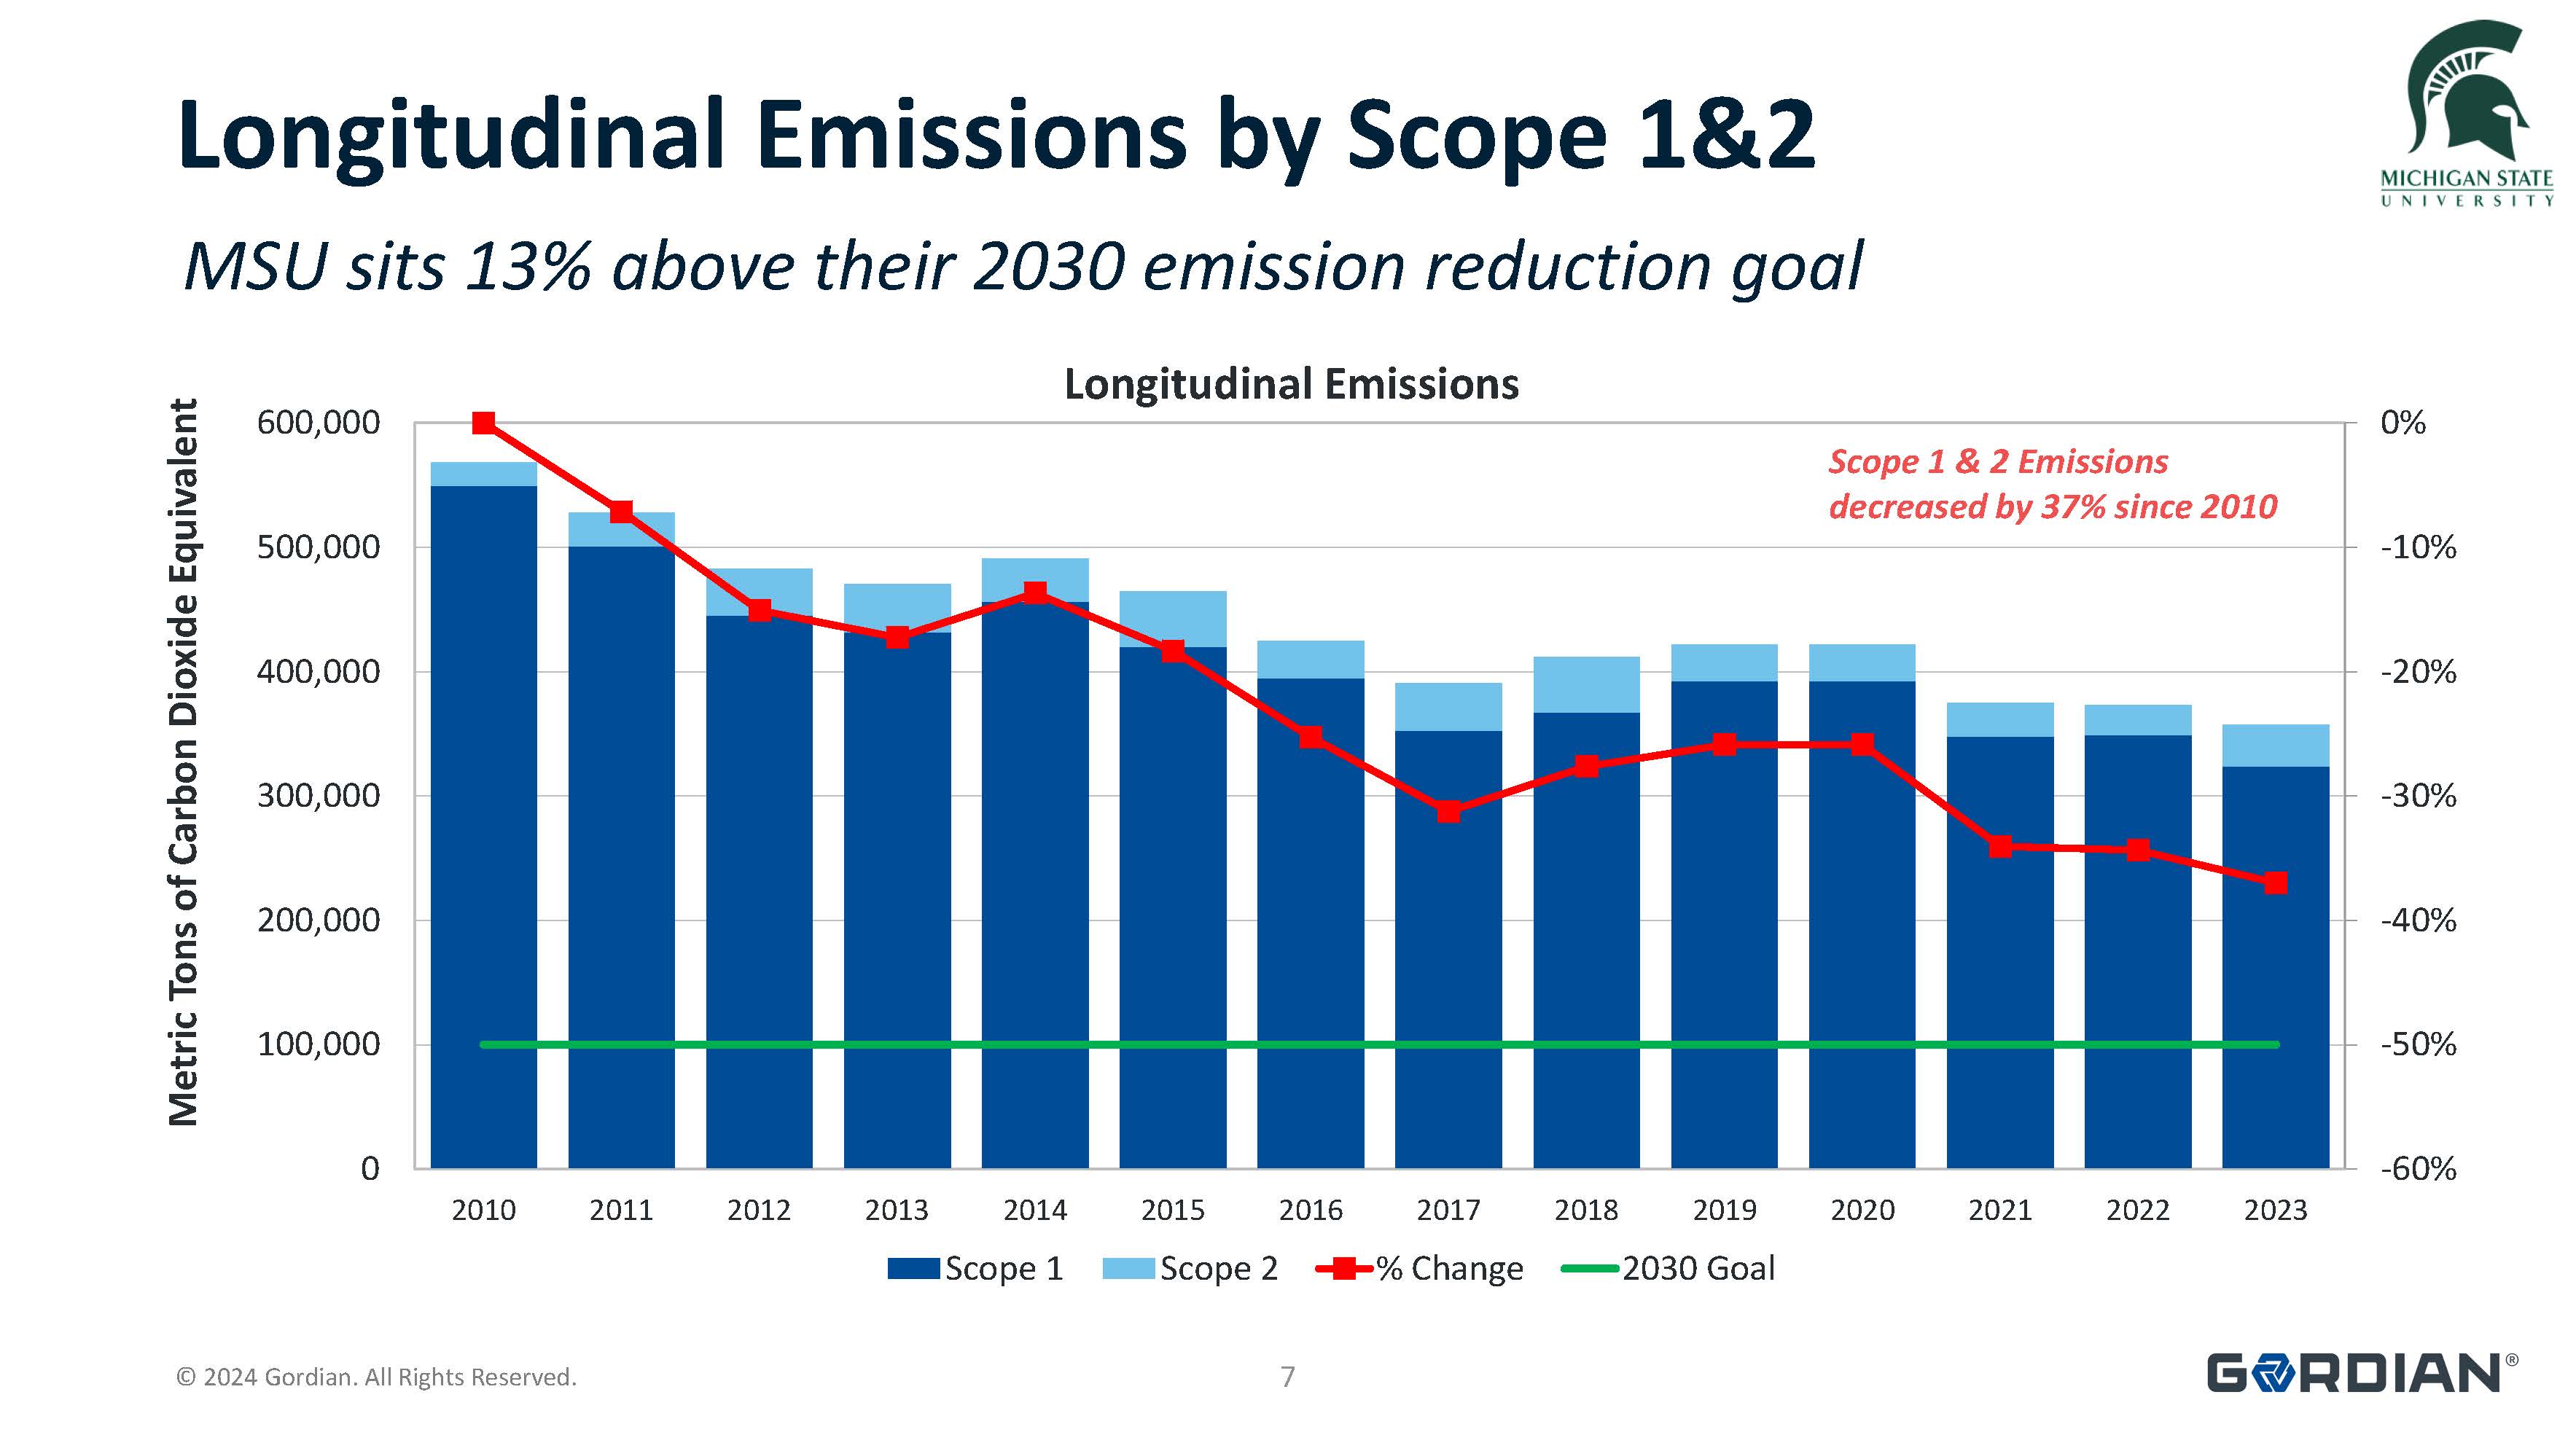 Graph showing Scope 1 and Scope 2 GHG emissions from FY10-FY23. MSU sits 13% above their 2030 emission reduction goal. Scope 1 and Scope 2 emissions have decreased by 37% since 2010.